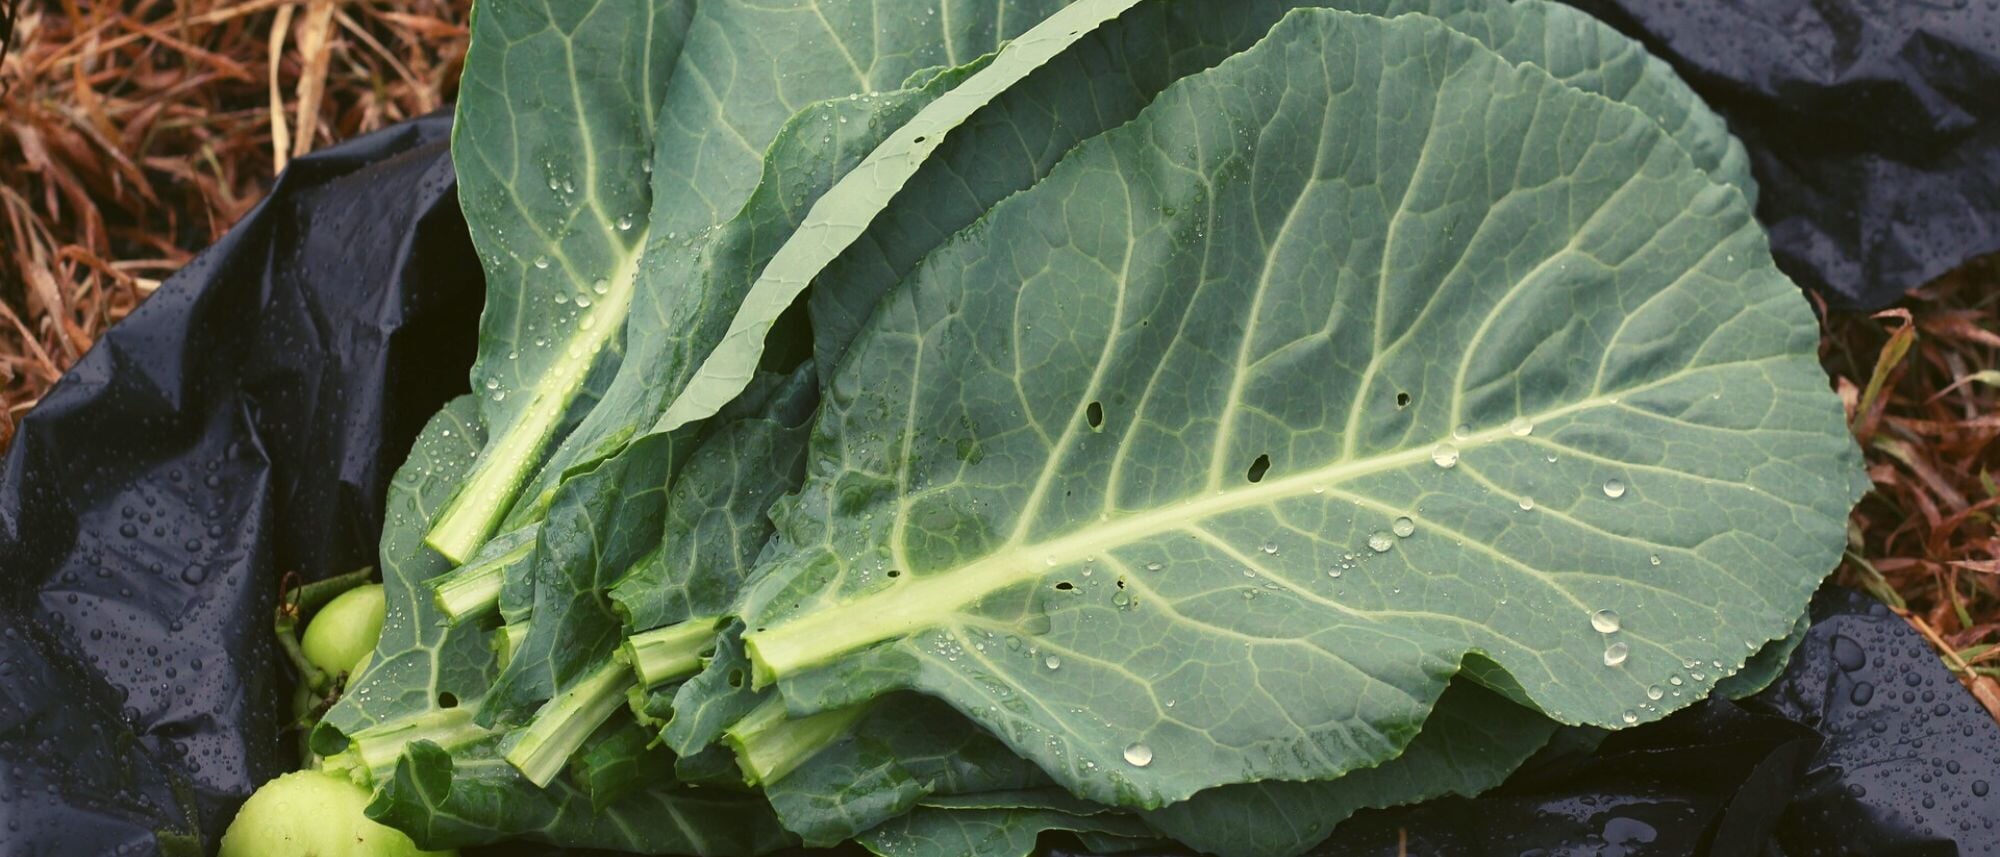 Collard greens nutritious leafy greens to grow in your garden